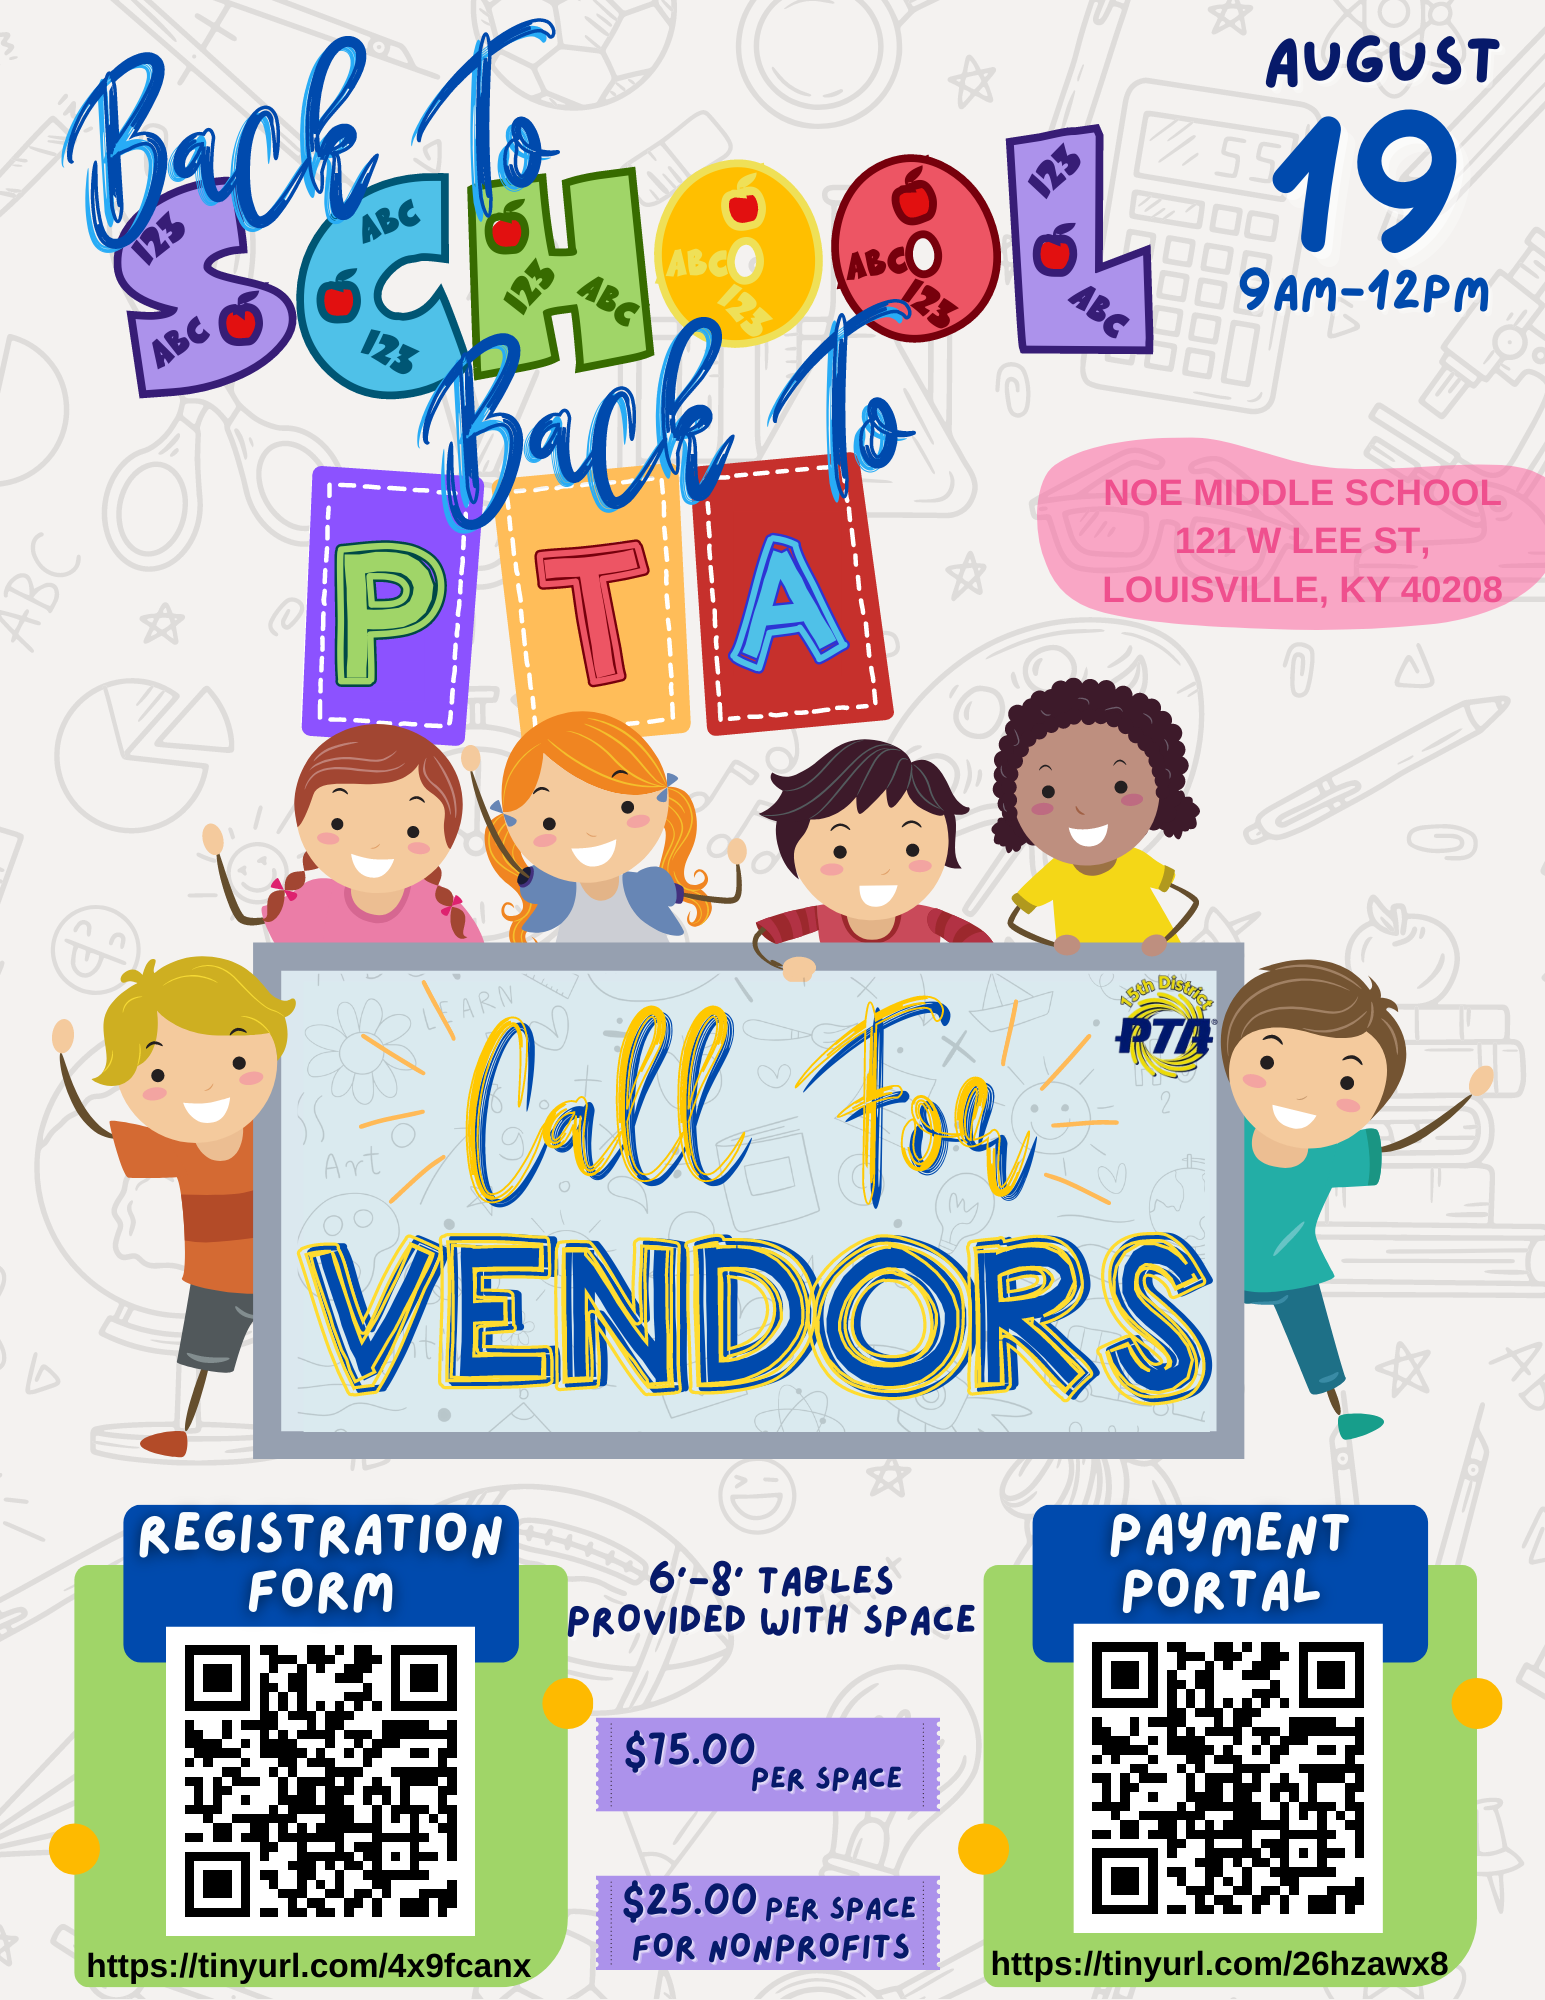 Call for Vendors at Back to School / Back to PTA